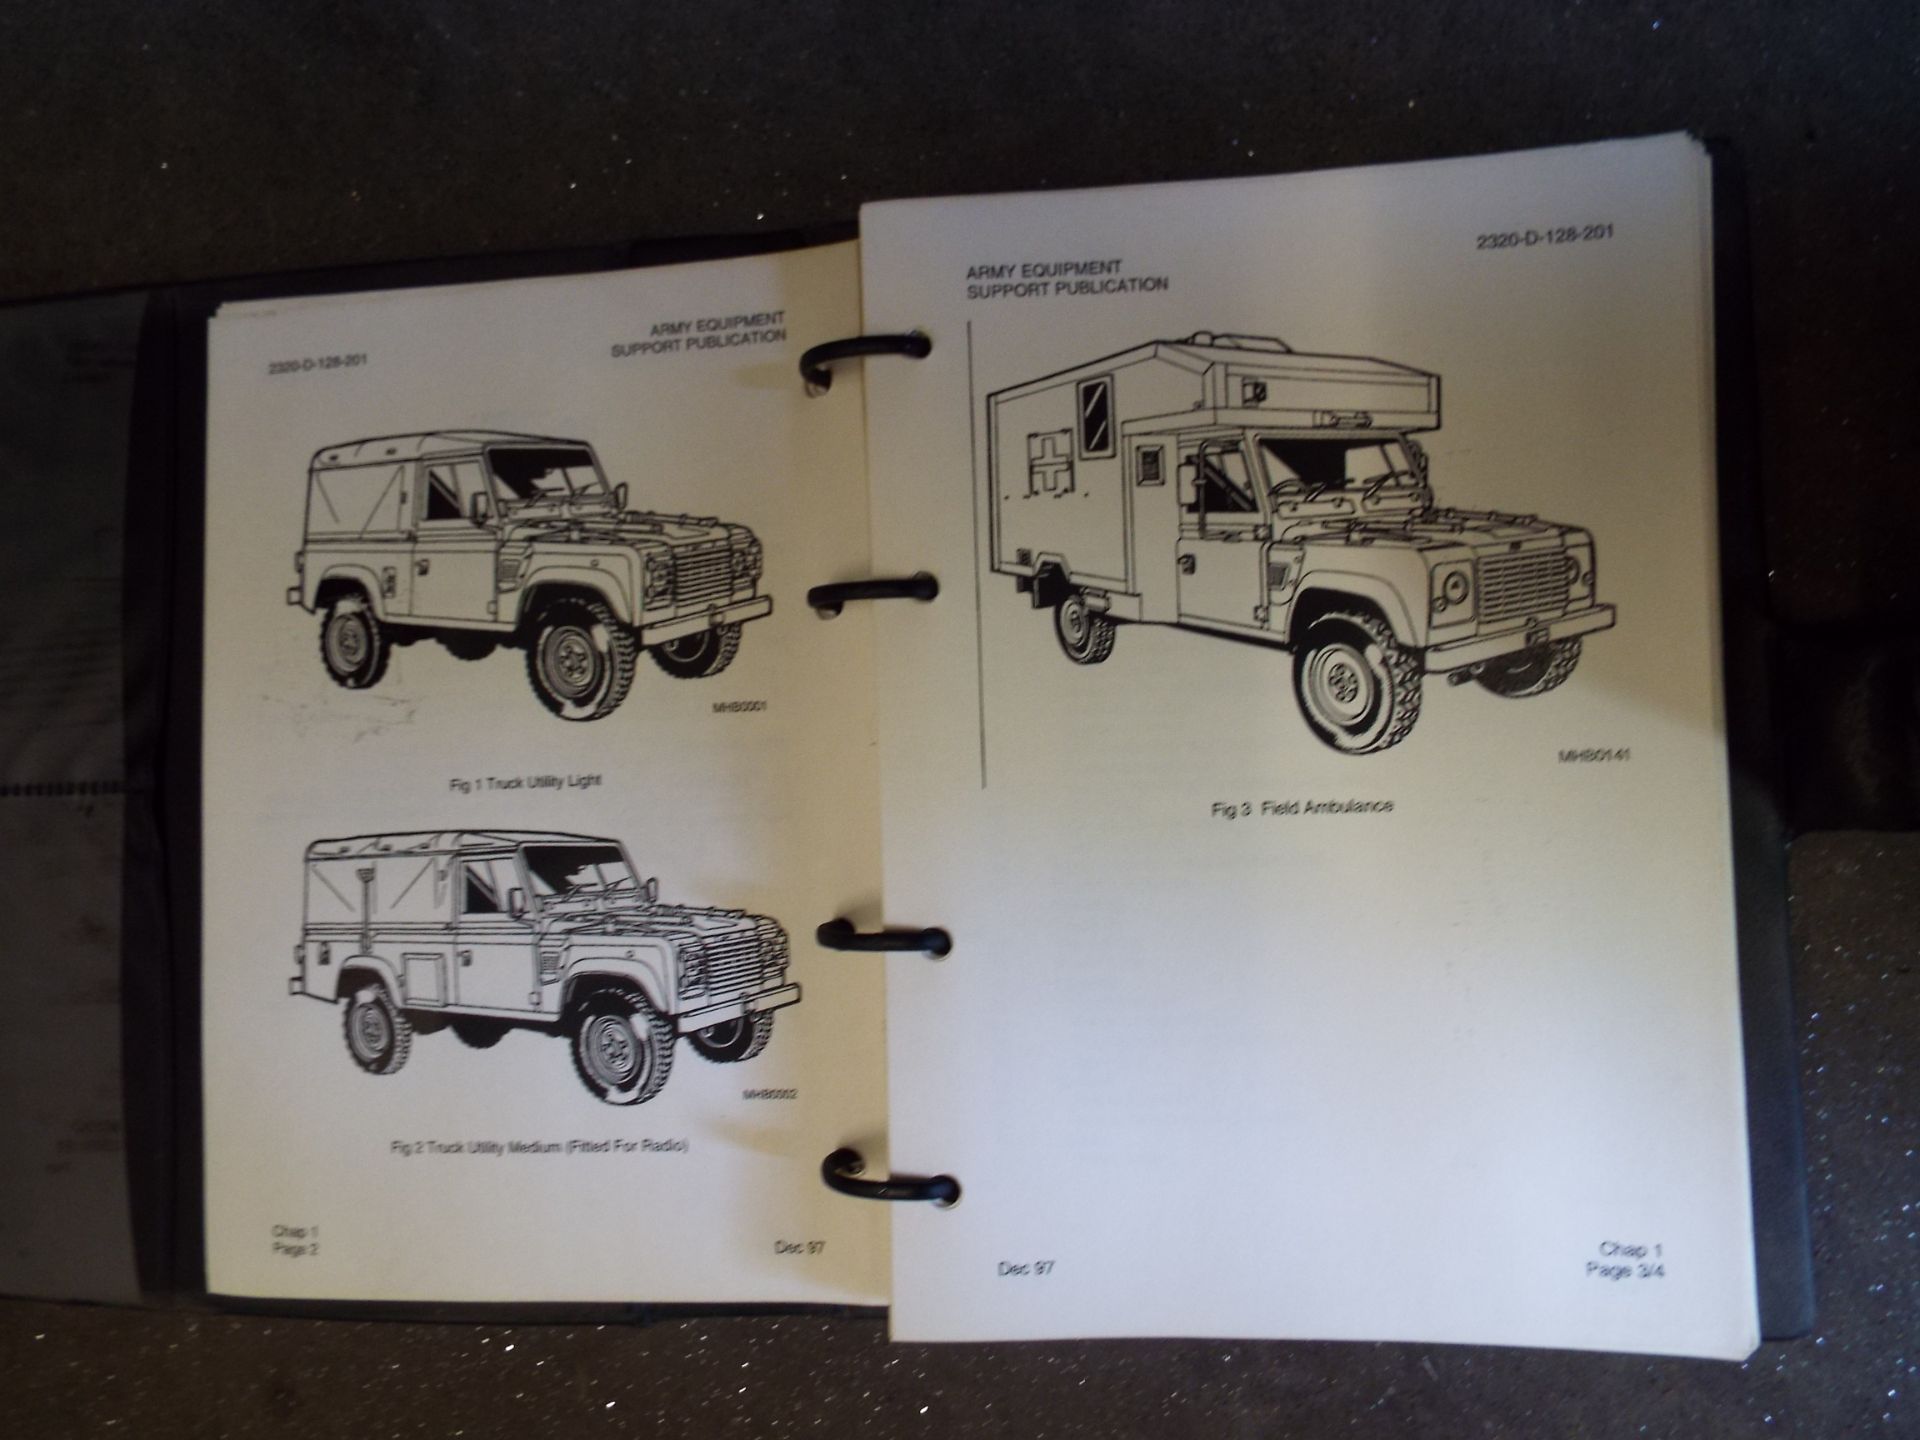 Extremely Rare Military Land Rover WOLF Operating Manual - Image 3 of 10